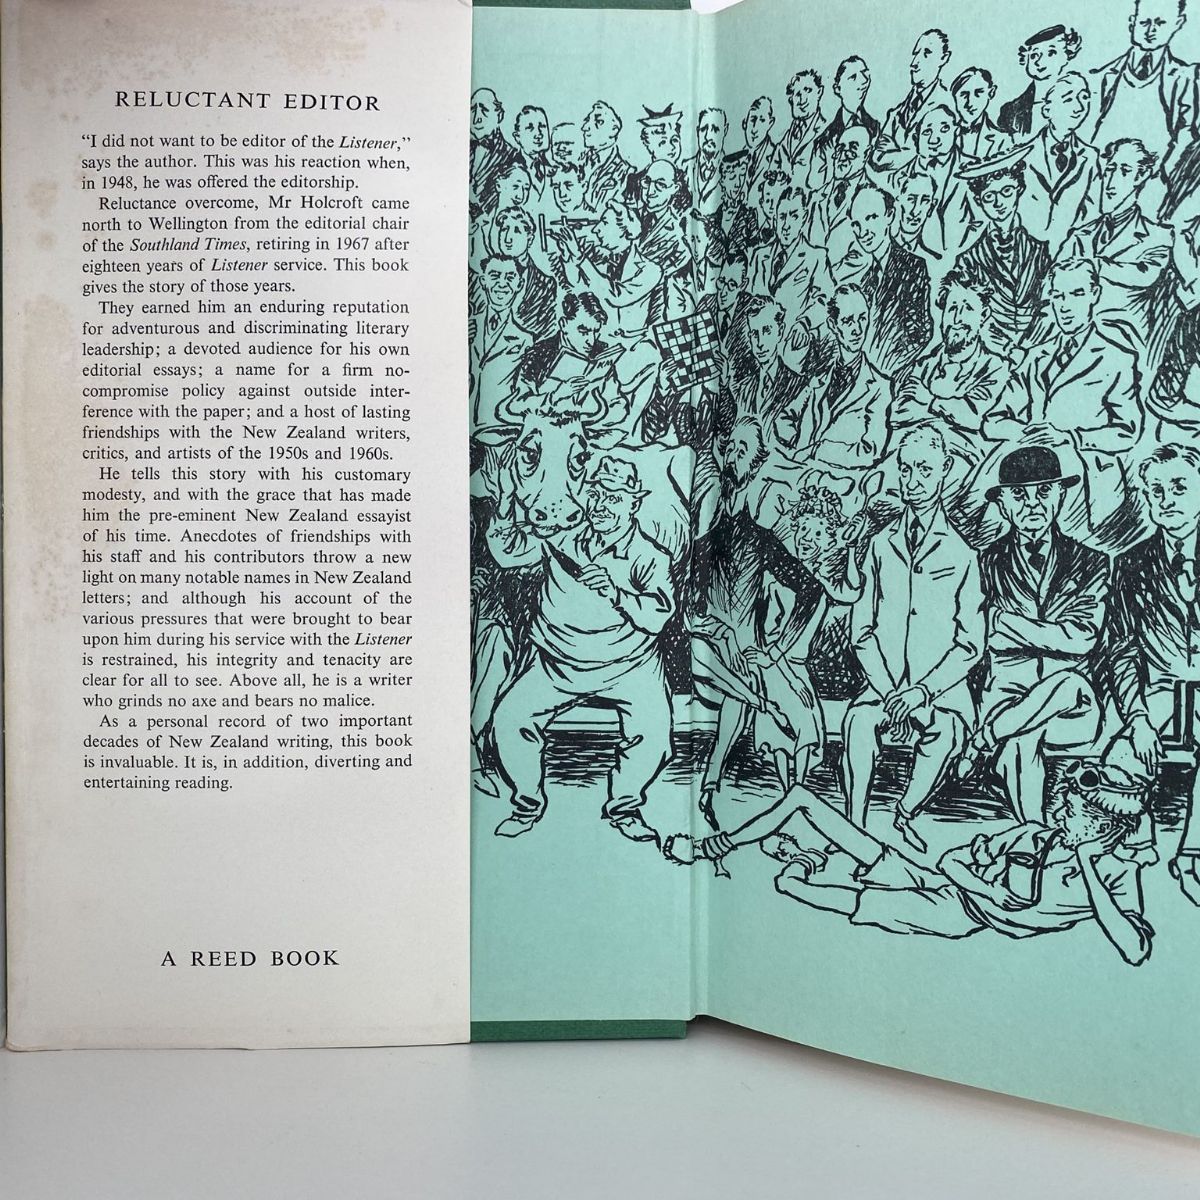 RELUCTANT EDITOR: The Listener Years 1949 - 1967